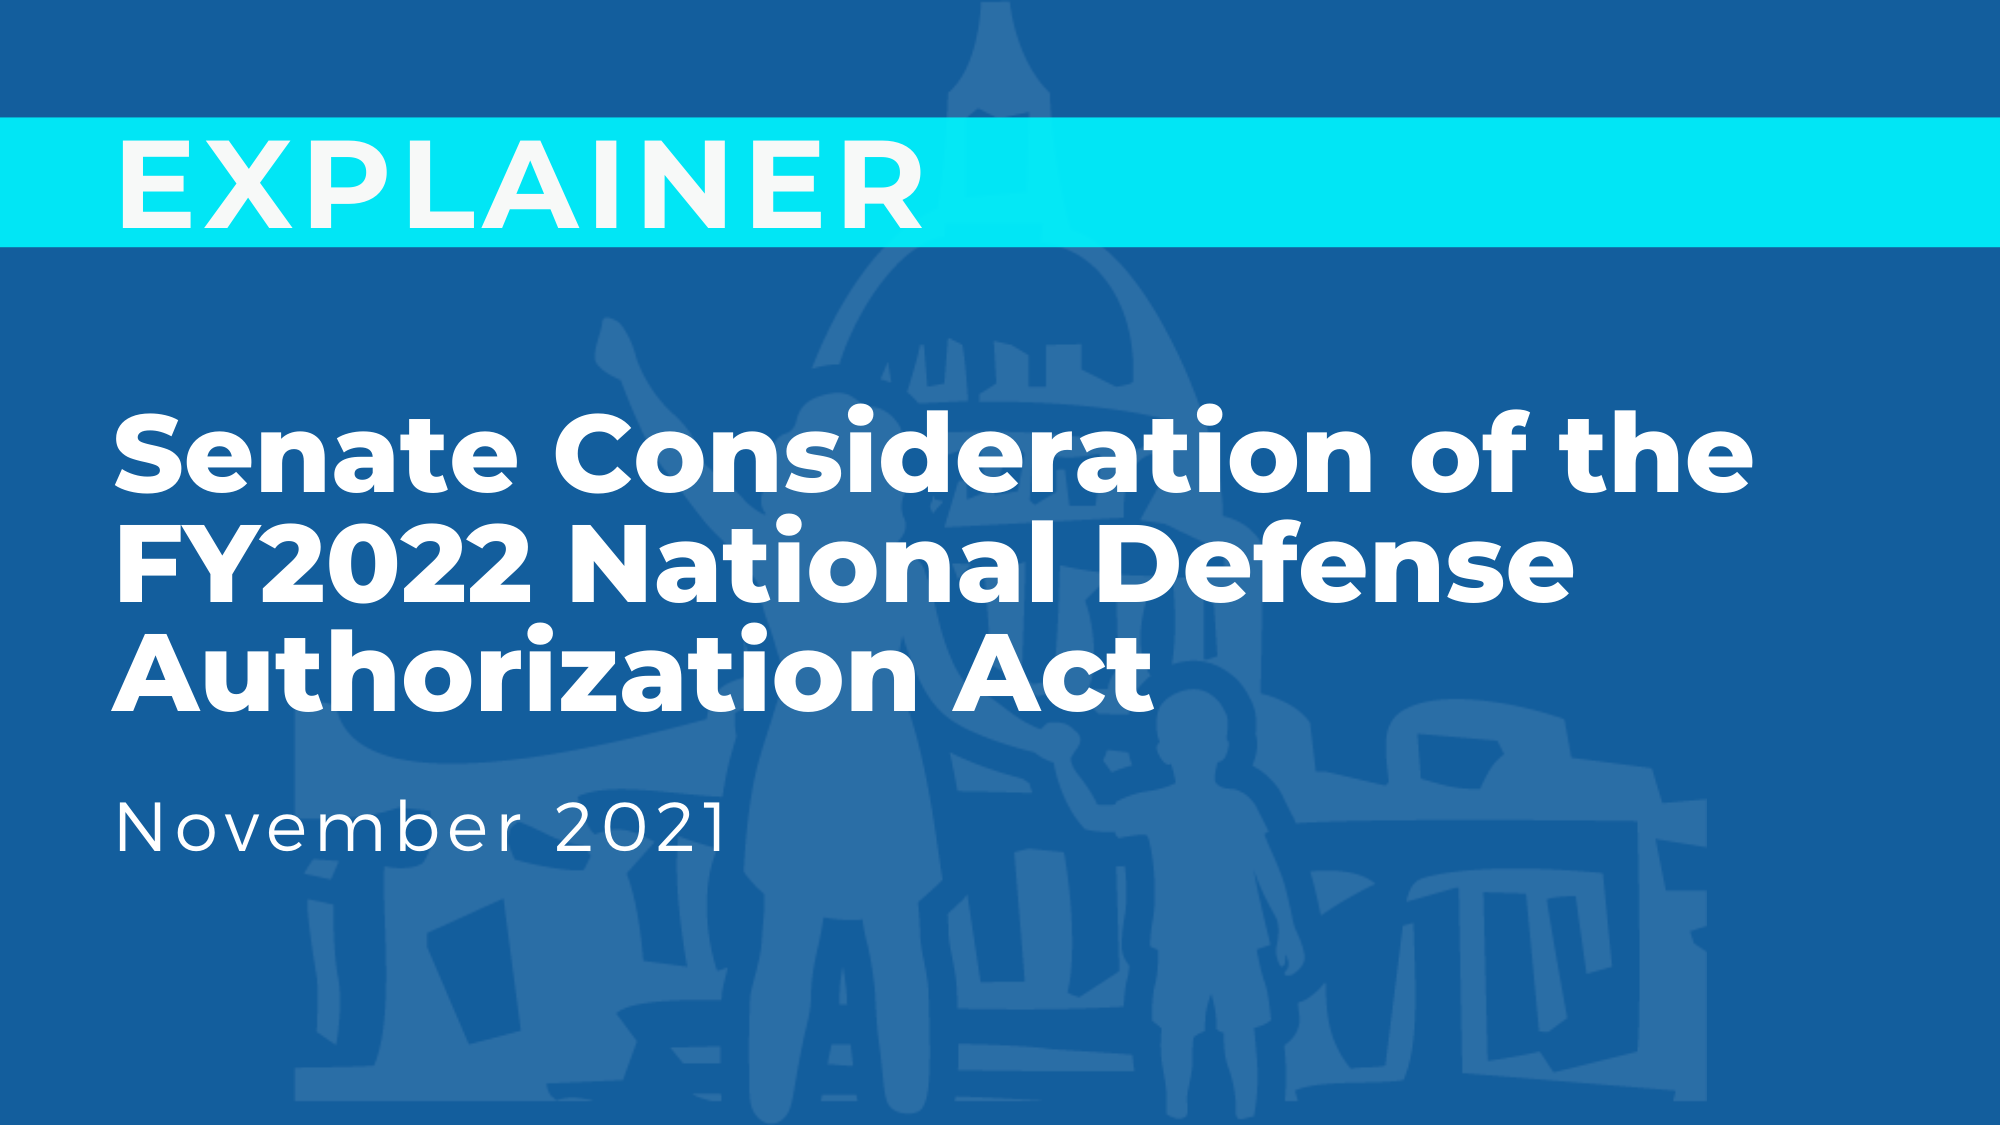 Senate Consideration of the FY2022 National Defense Authorization Act